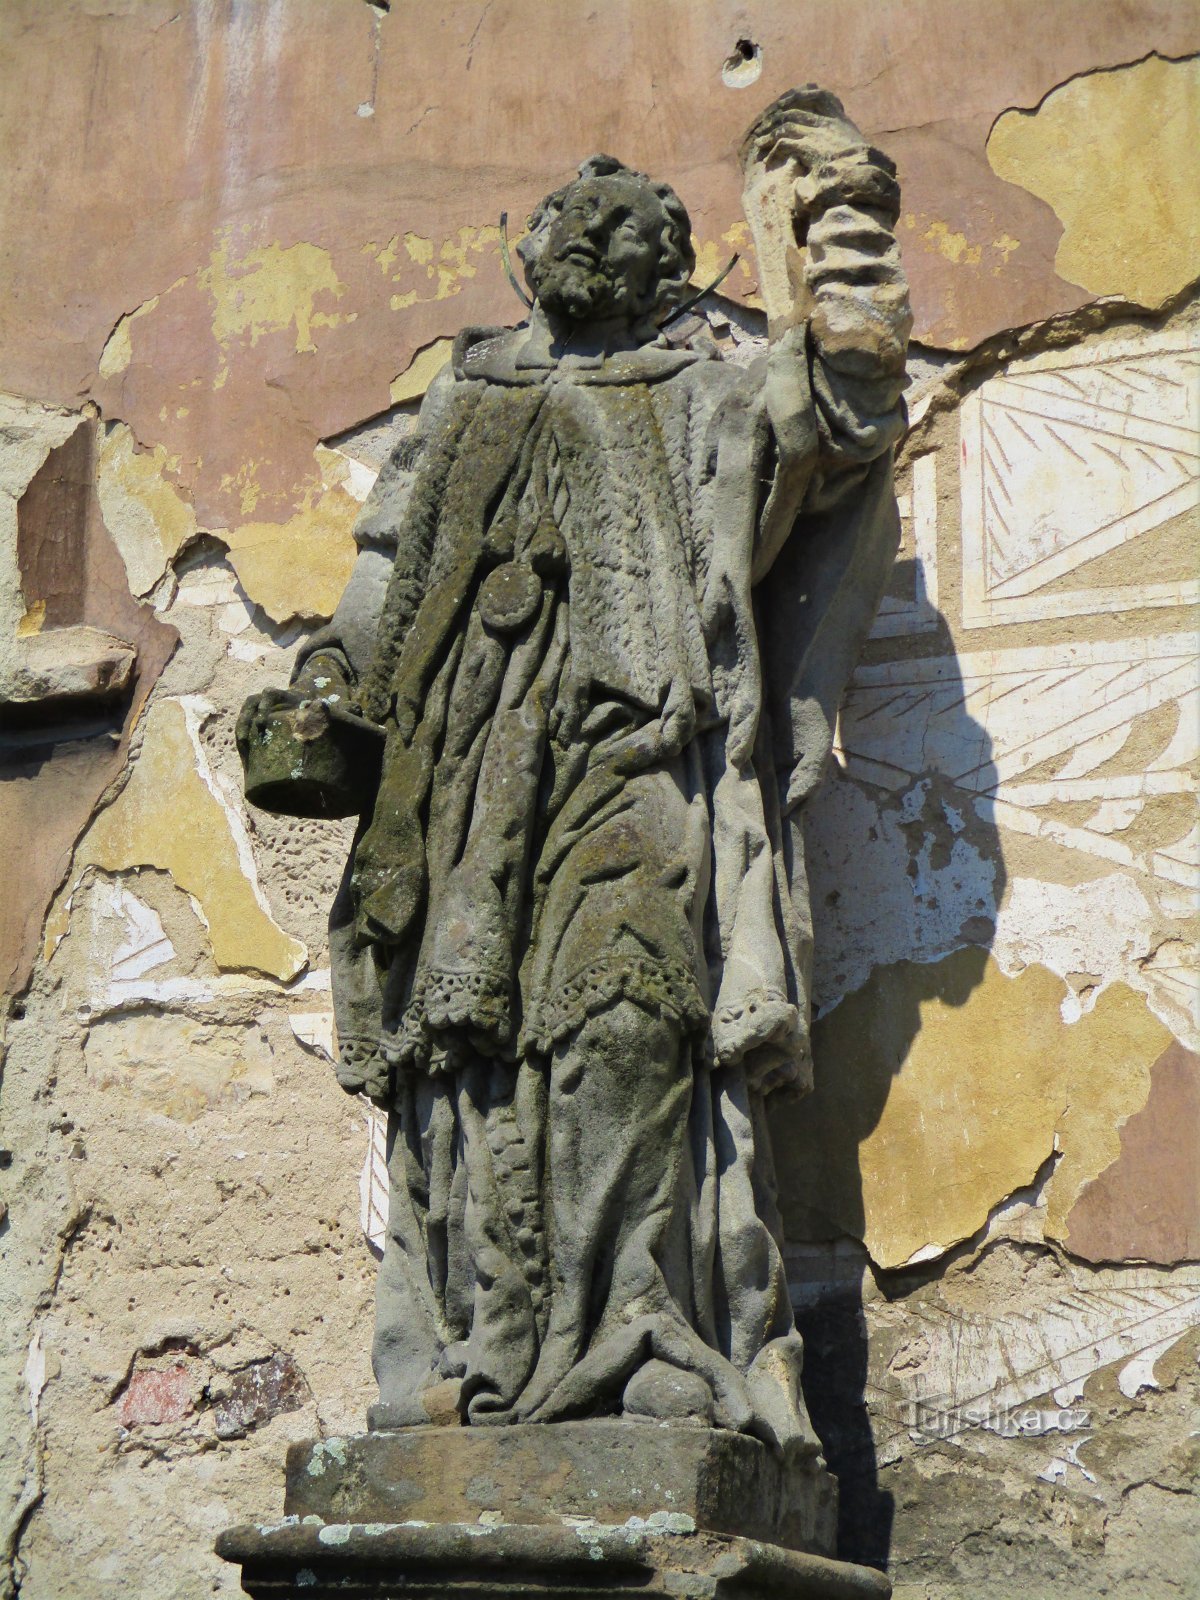 Statue of St. John of Nepomuck in front of the mill (Dašice, May 16.5.2020, XNUMX)